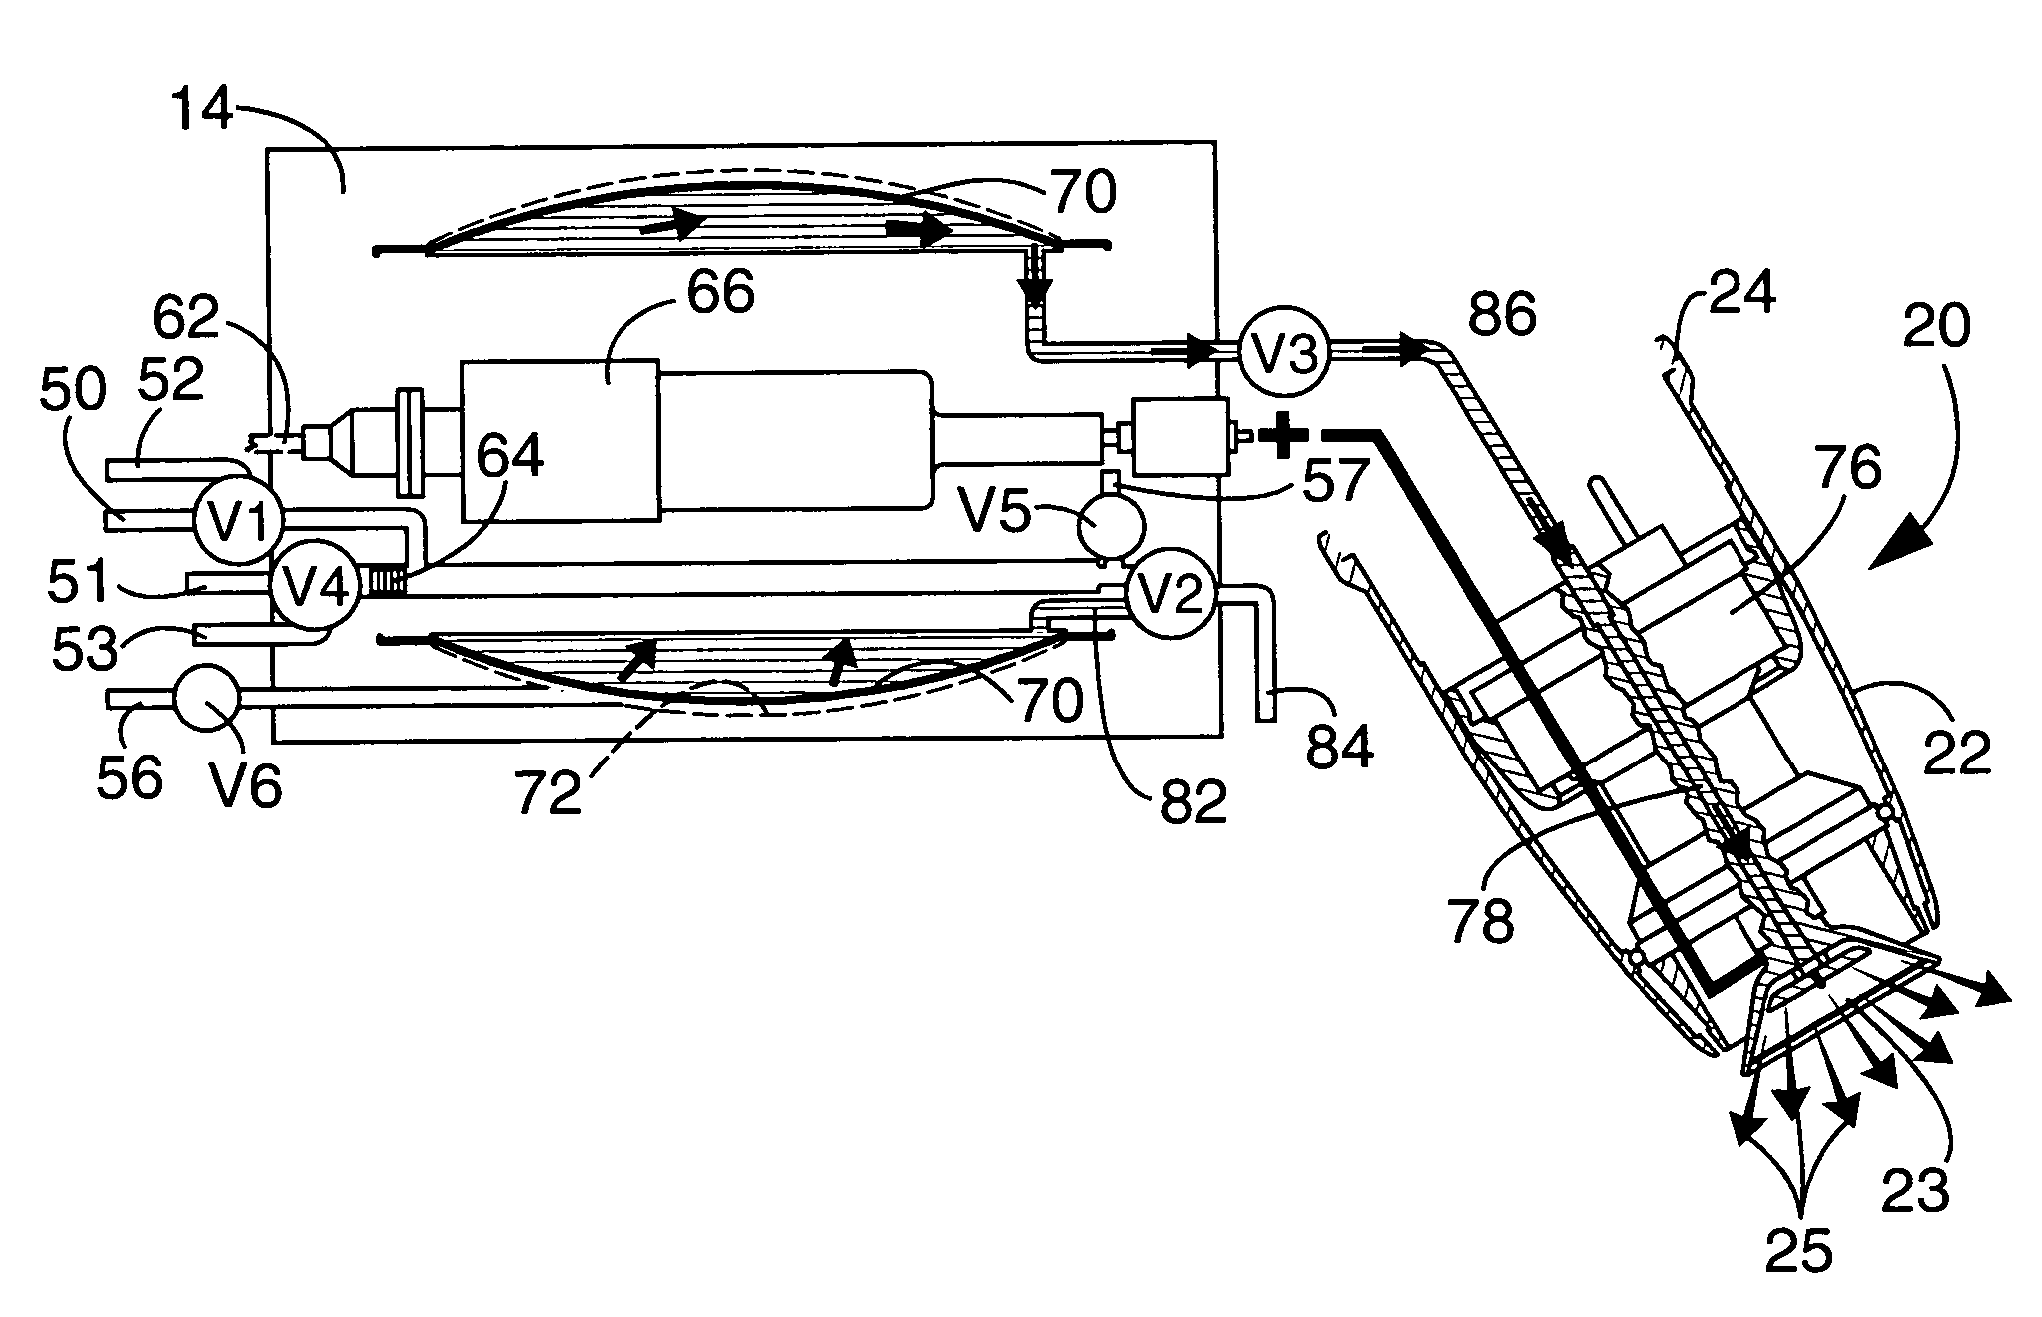 Apparatus and method for electrostatic spraying of conductive coating materials